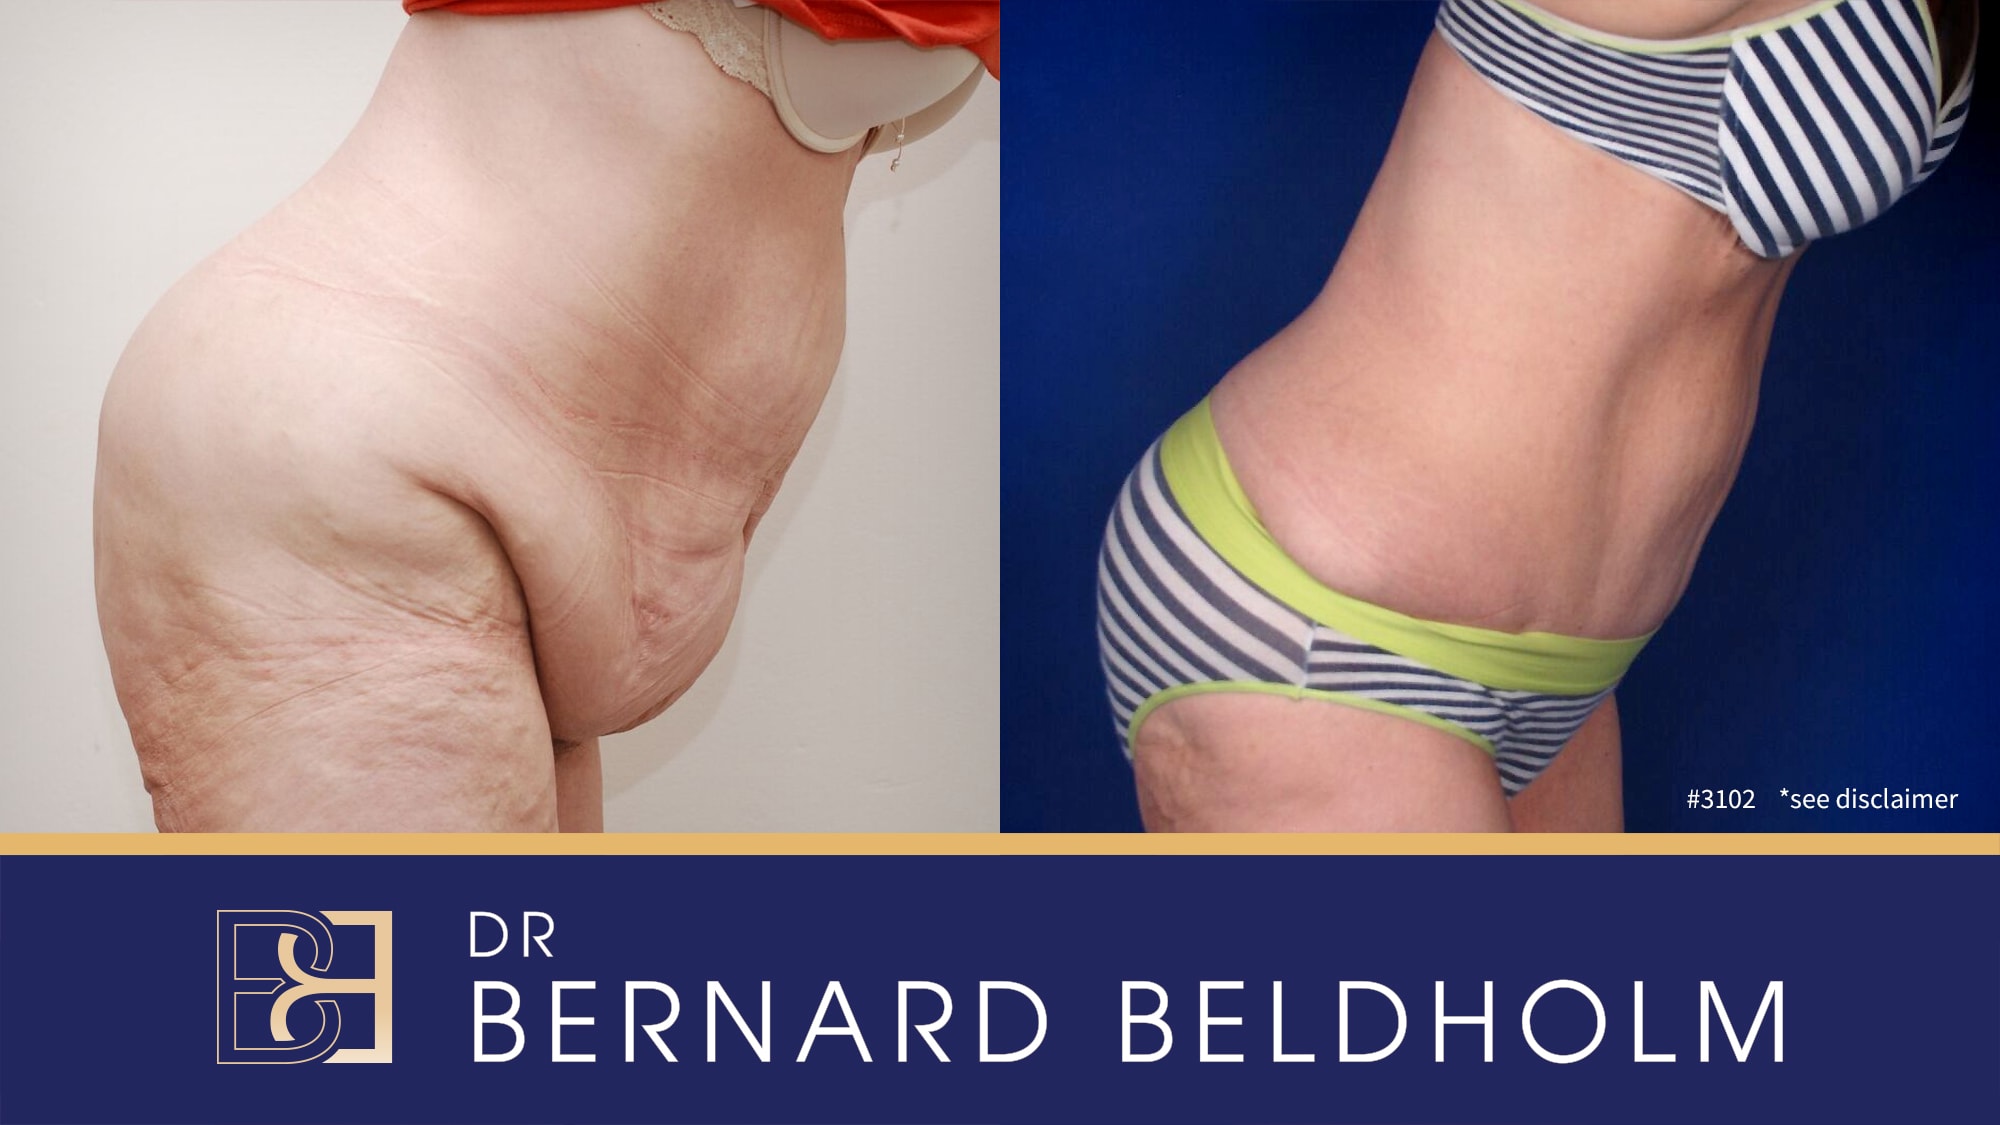 Extended abdominoplasty post weight loss performed by Dr Bernard Beldholm